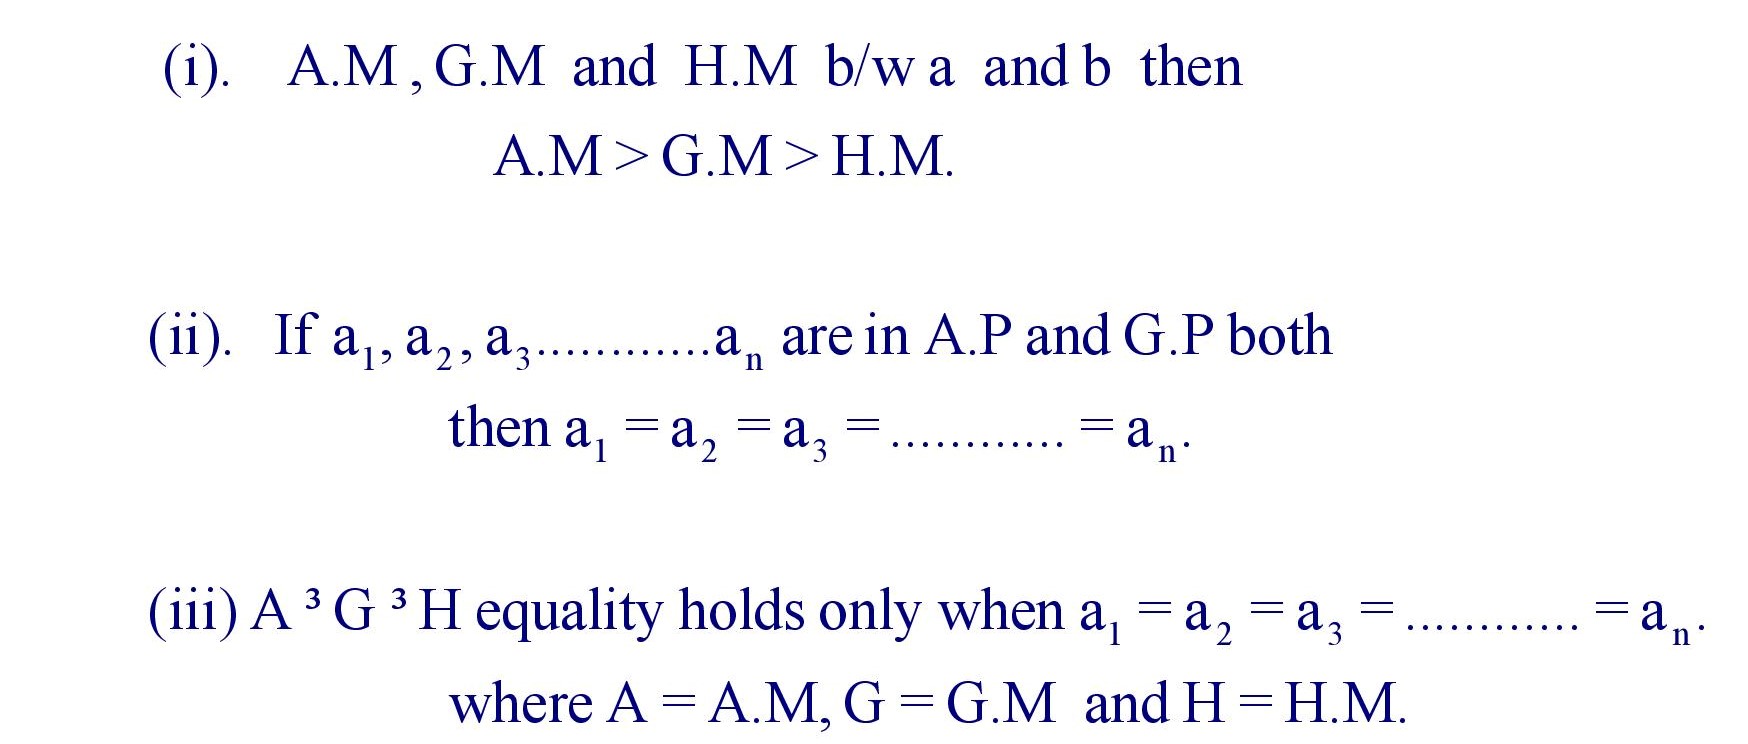 Relation between A.M , G.M and H.M